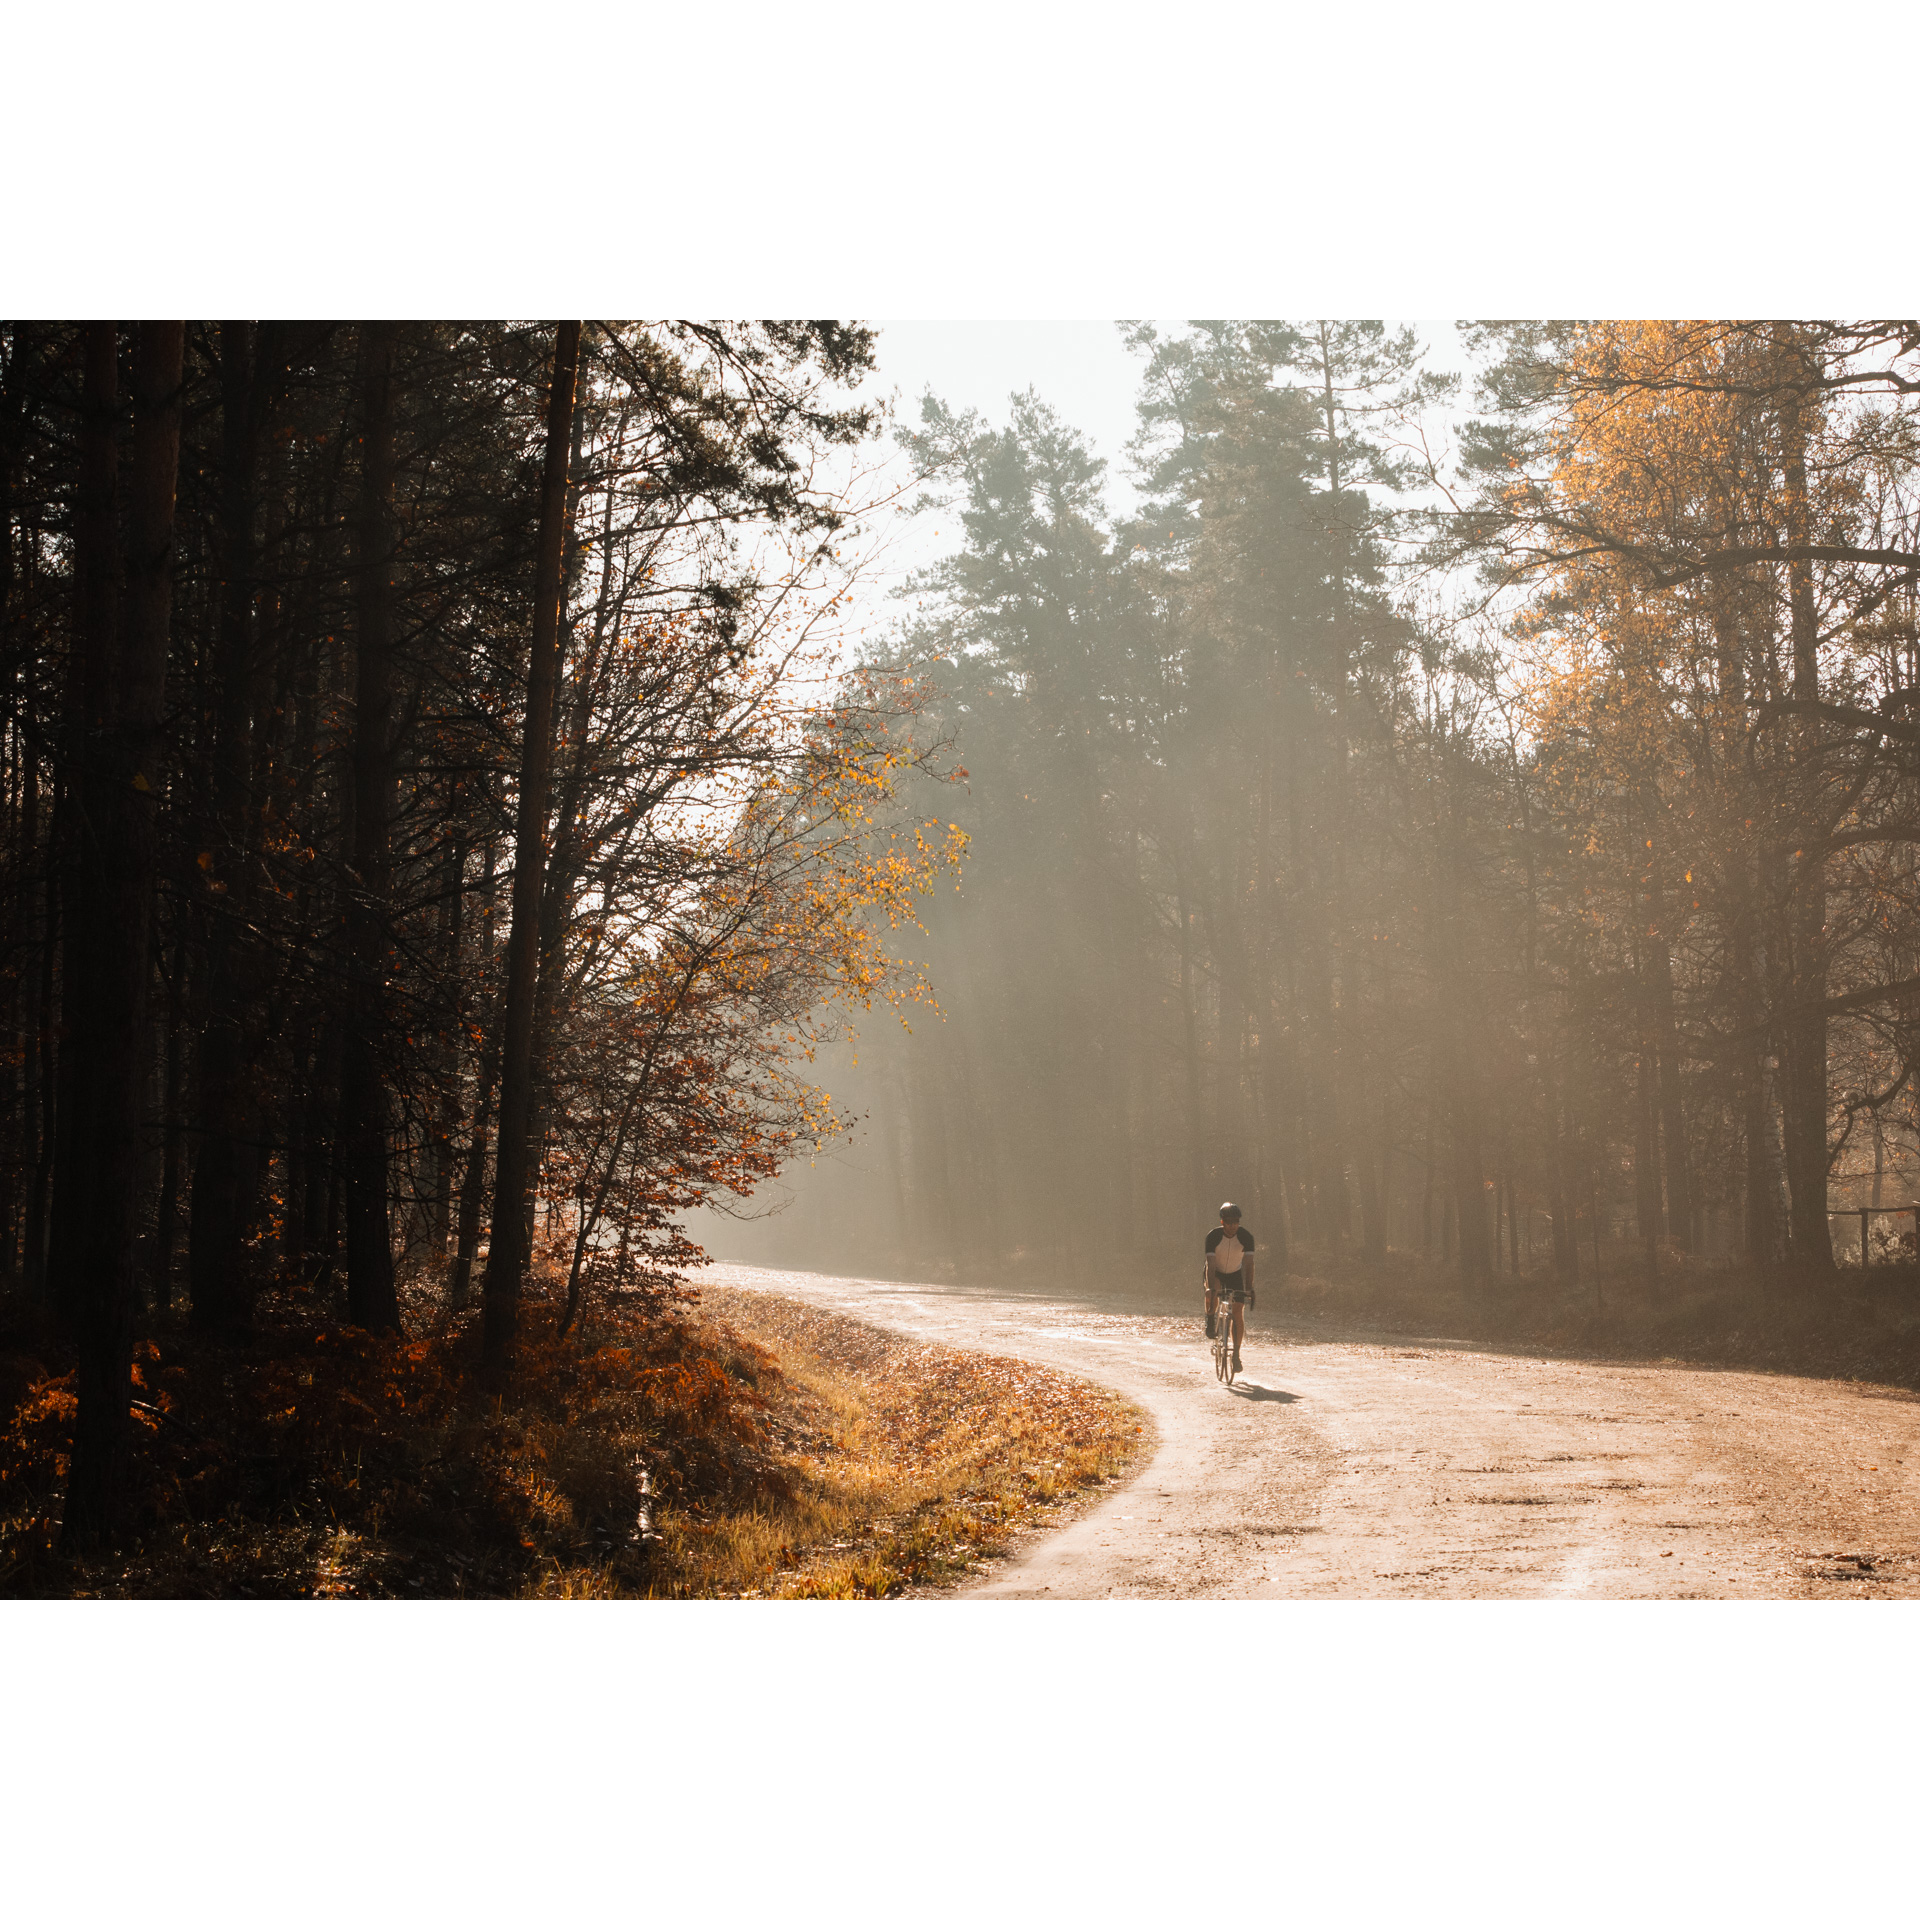 A cyclist in a black and white outfit riding a paved road through an autumn forest in foggy weather